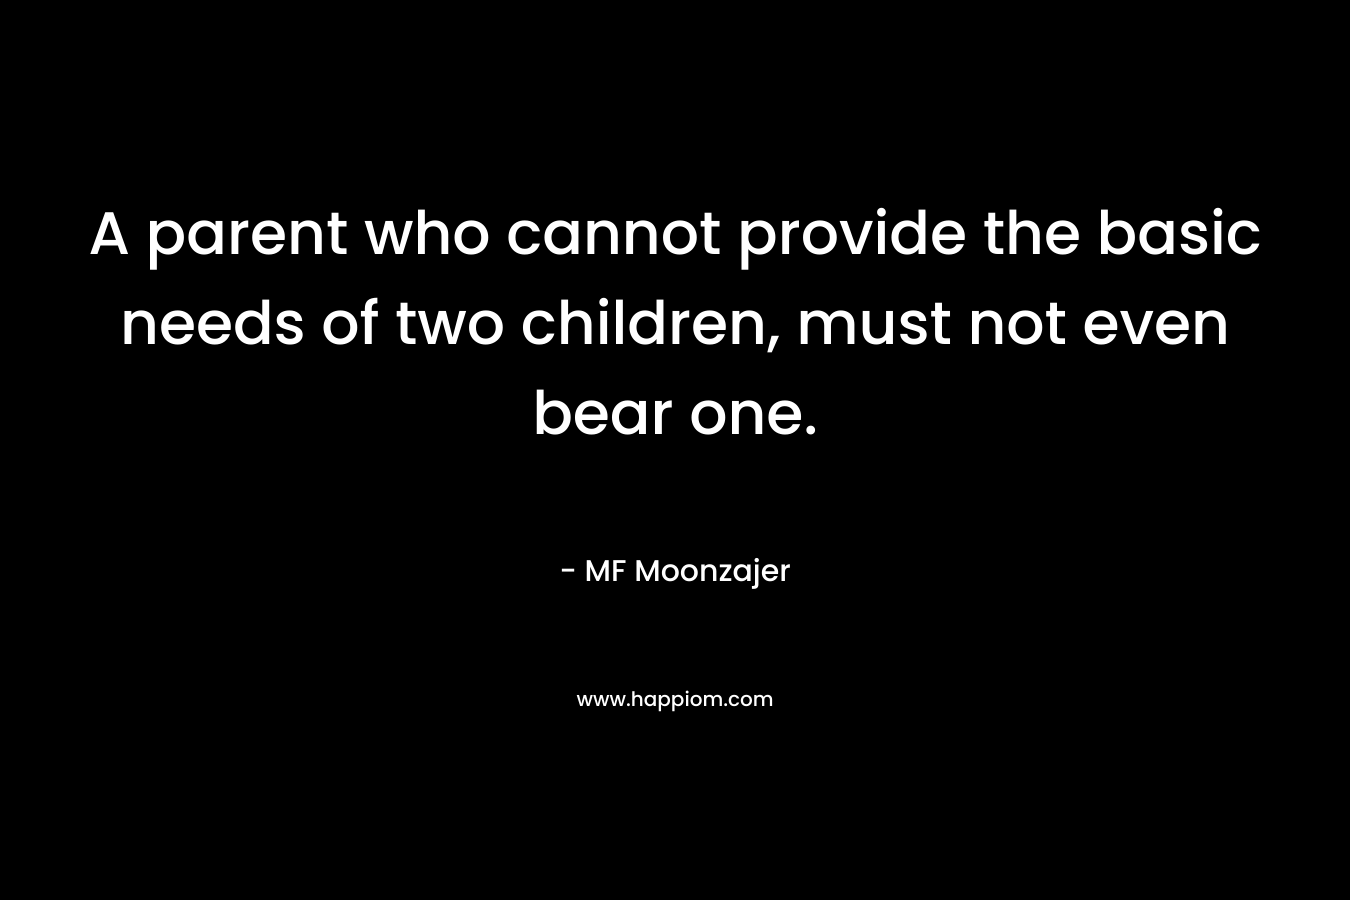 A parent who cannot provide the basic needs of two children, must not even bear one.